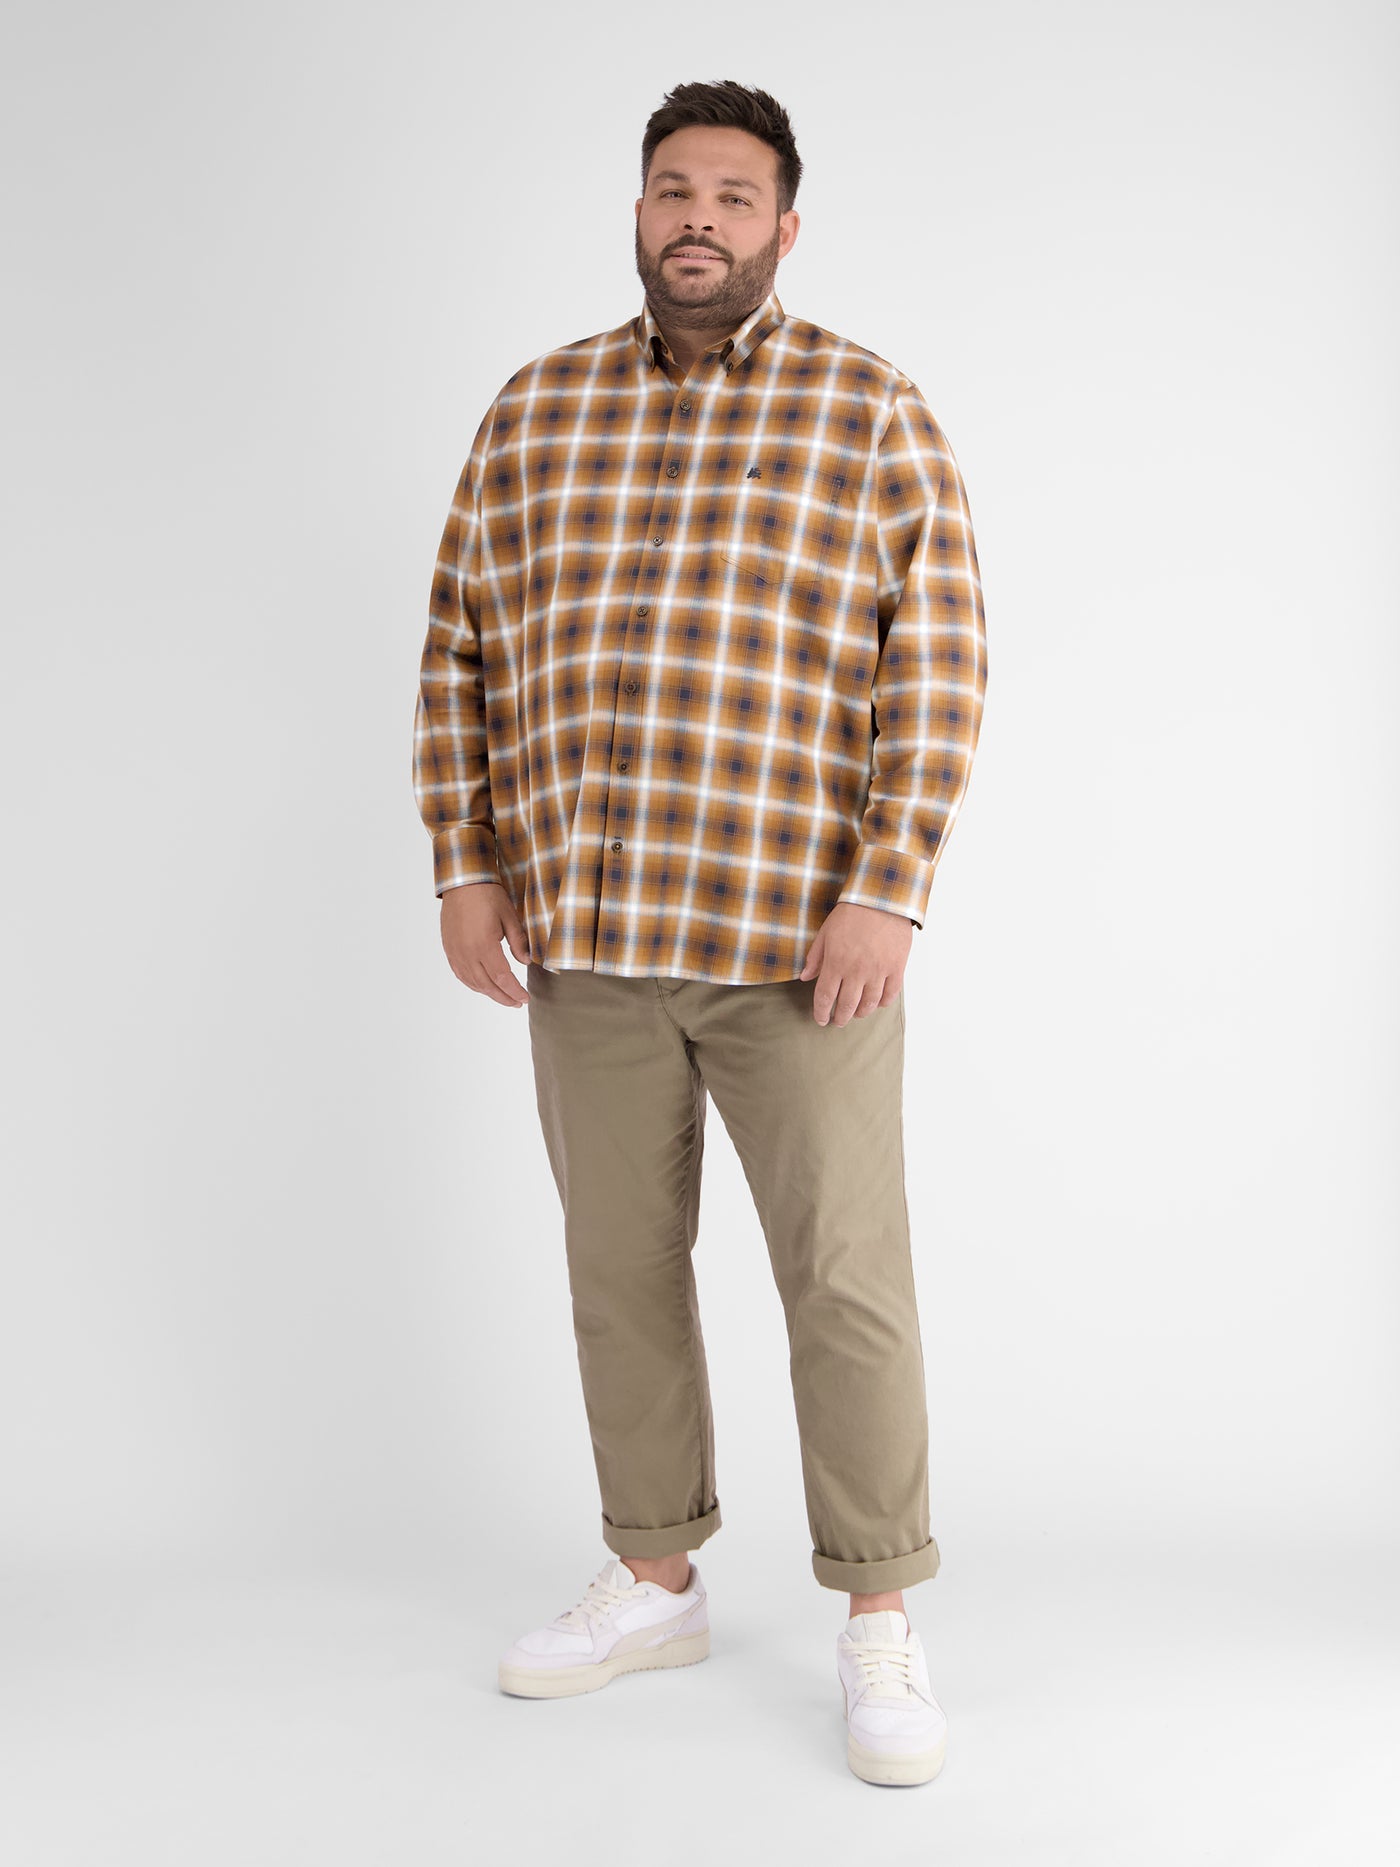 Checked shirt with a herringbone structure